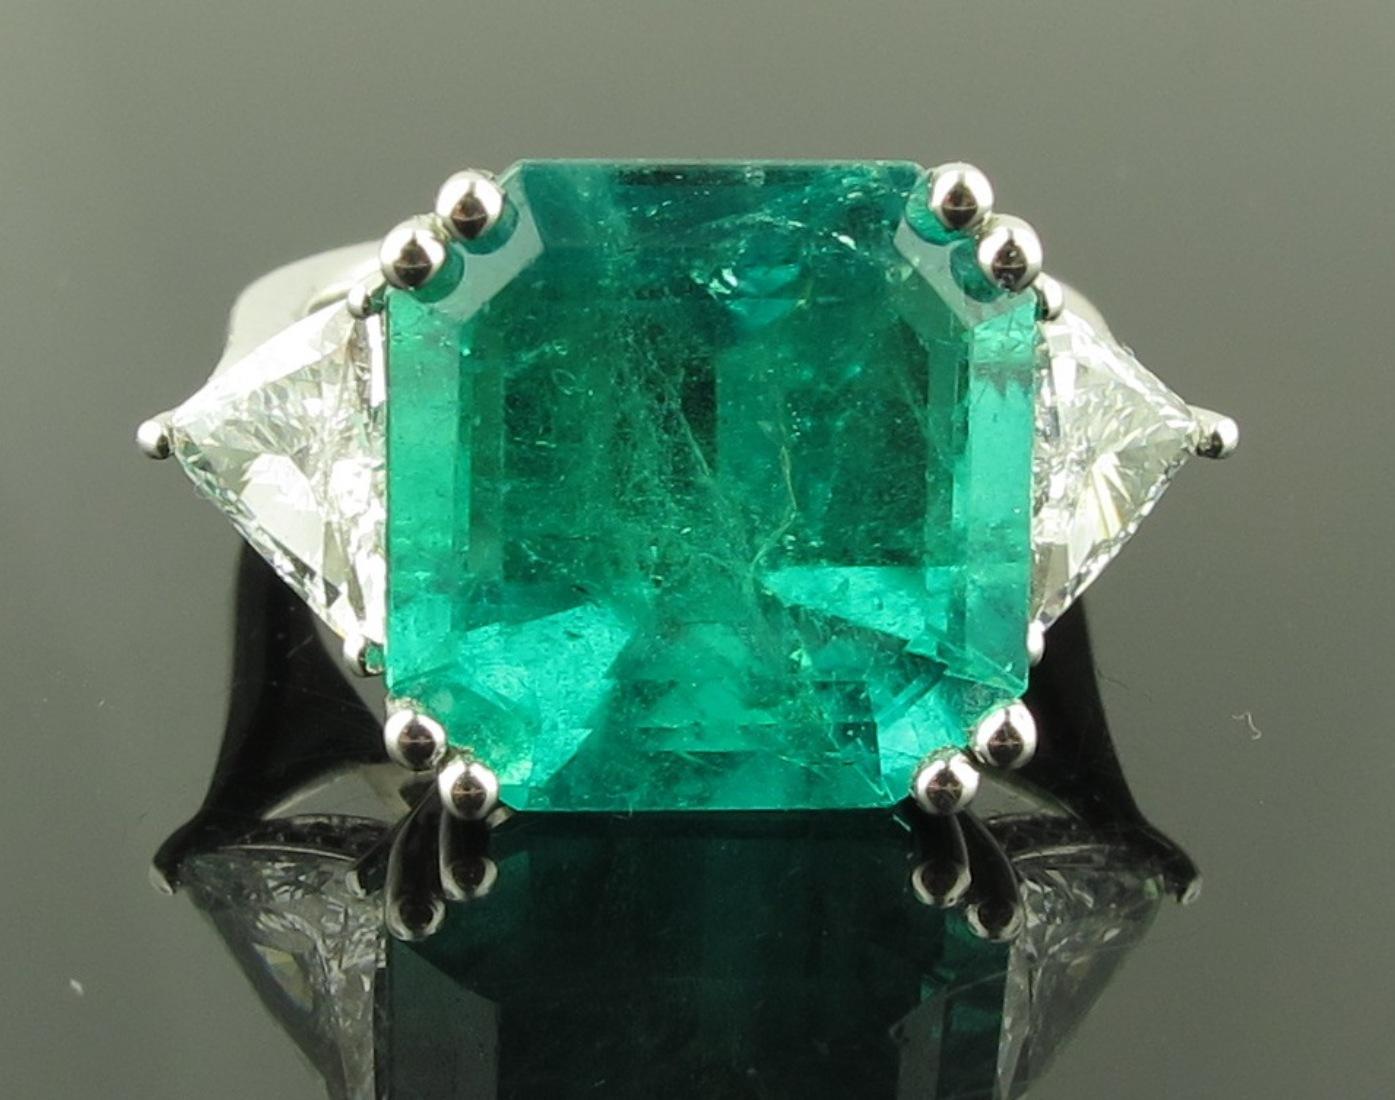 A 9.76 Square Cut center Emerald with 2 0.59 carat Trillion cut diamonds on the sides with 24 round brilliant cut diamonds surrounding stone.  Set in Platinum.  Ring size 6,